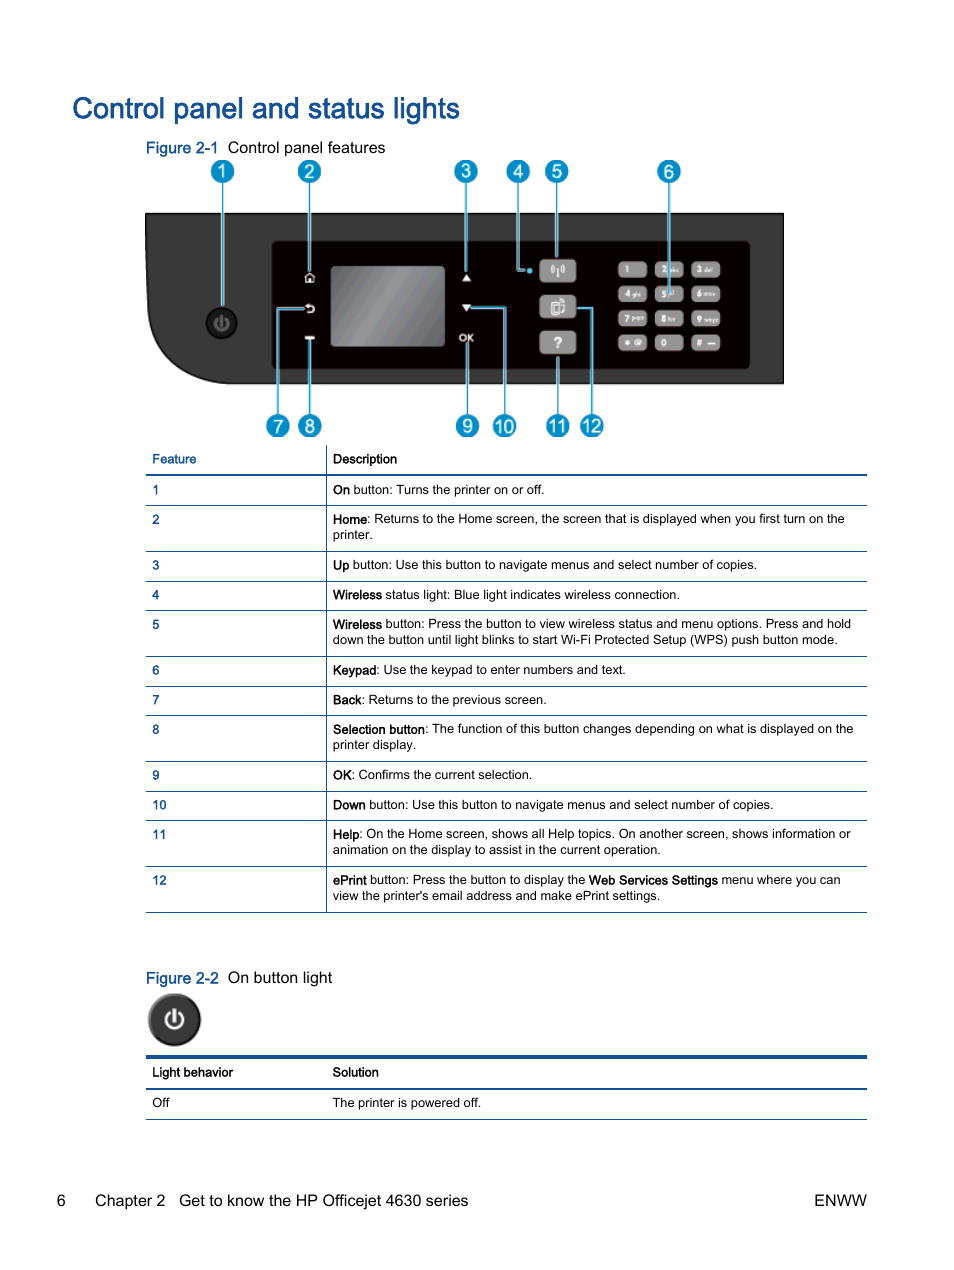 Control panel and status lights | HP Officejet 4630 e-All-in-One Printer  User Manual | Page 12 / 166